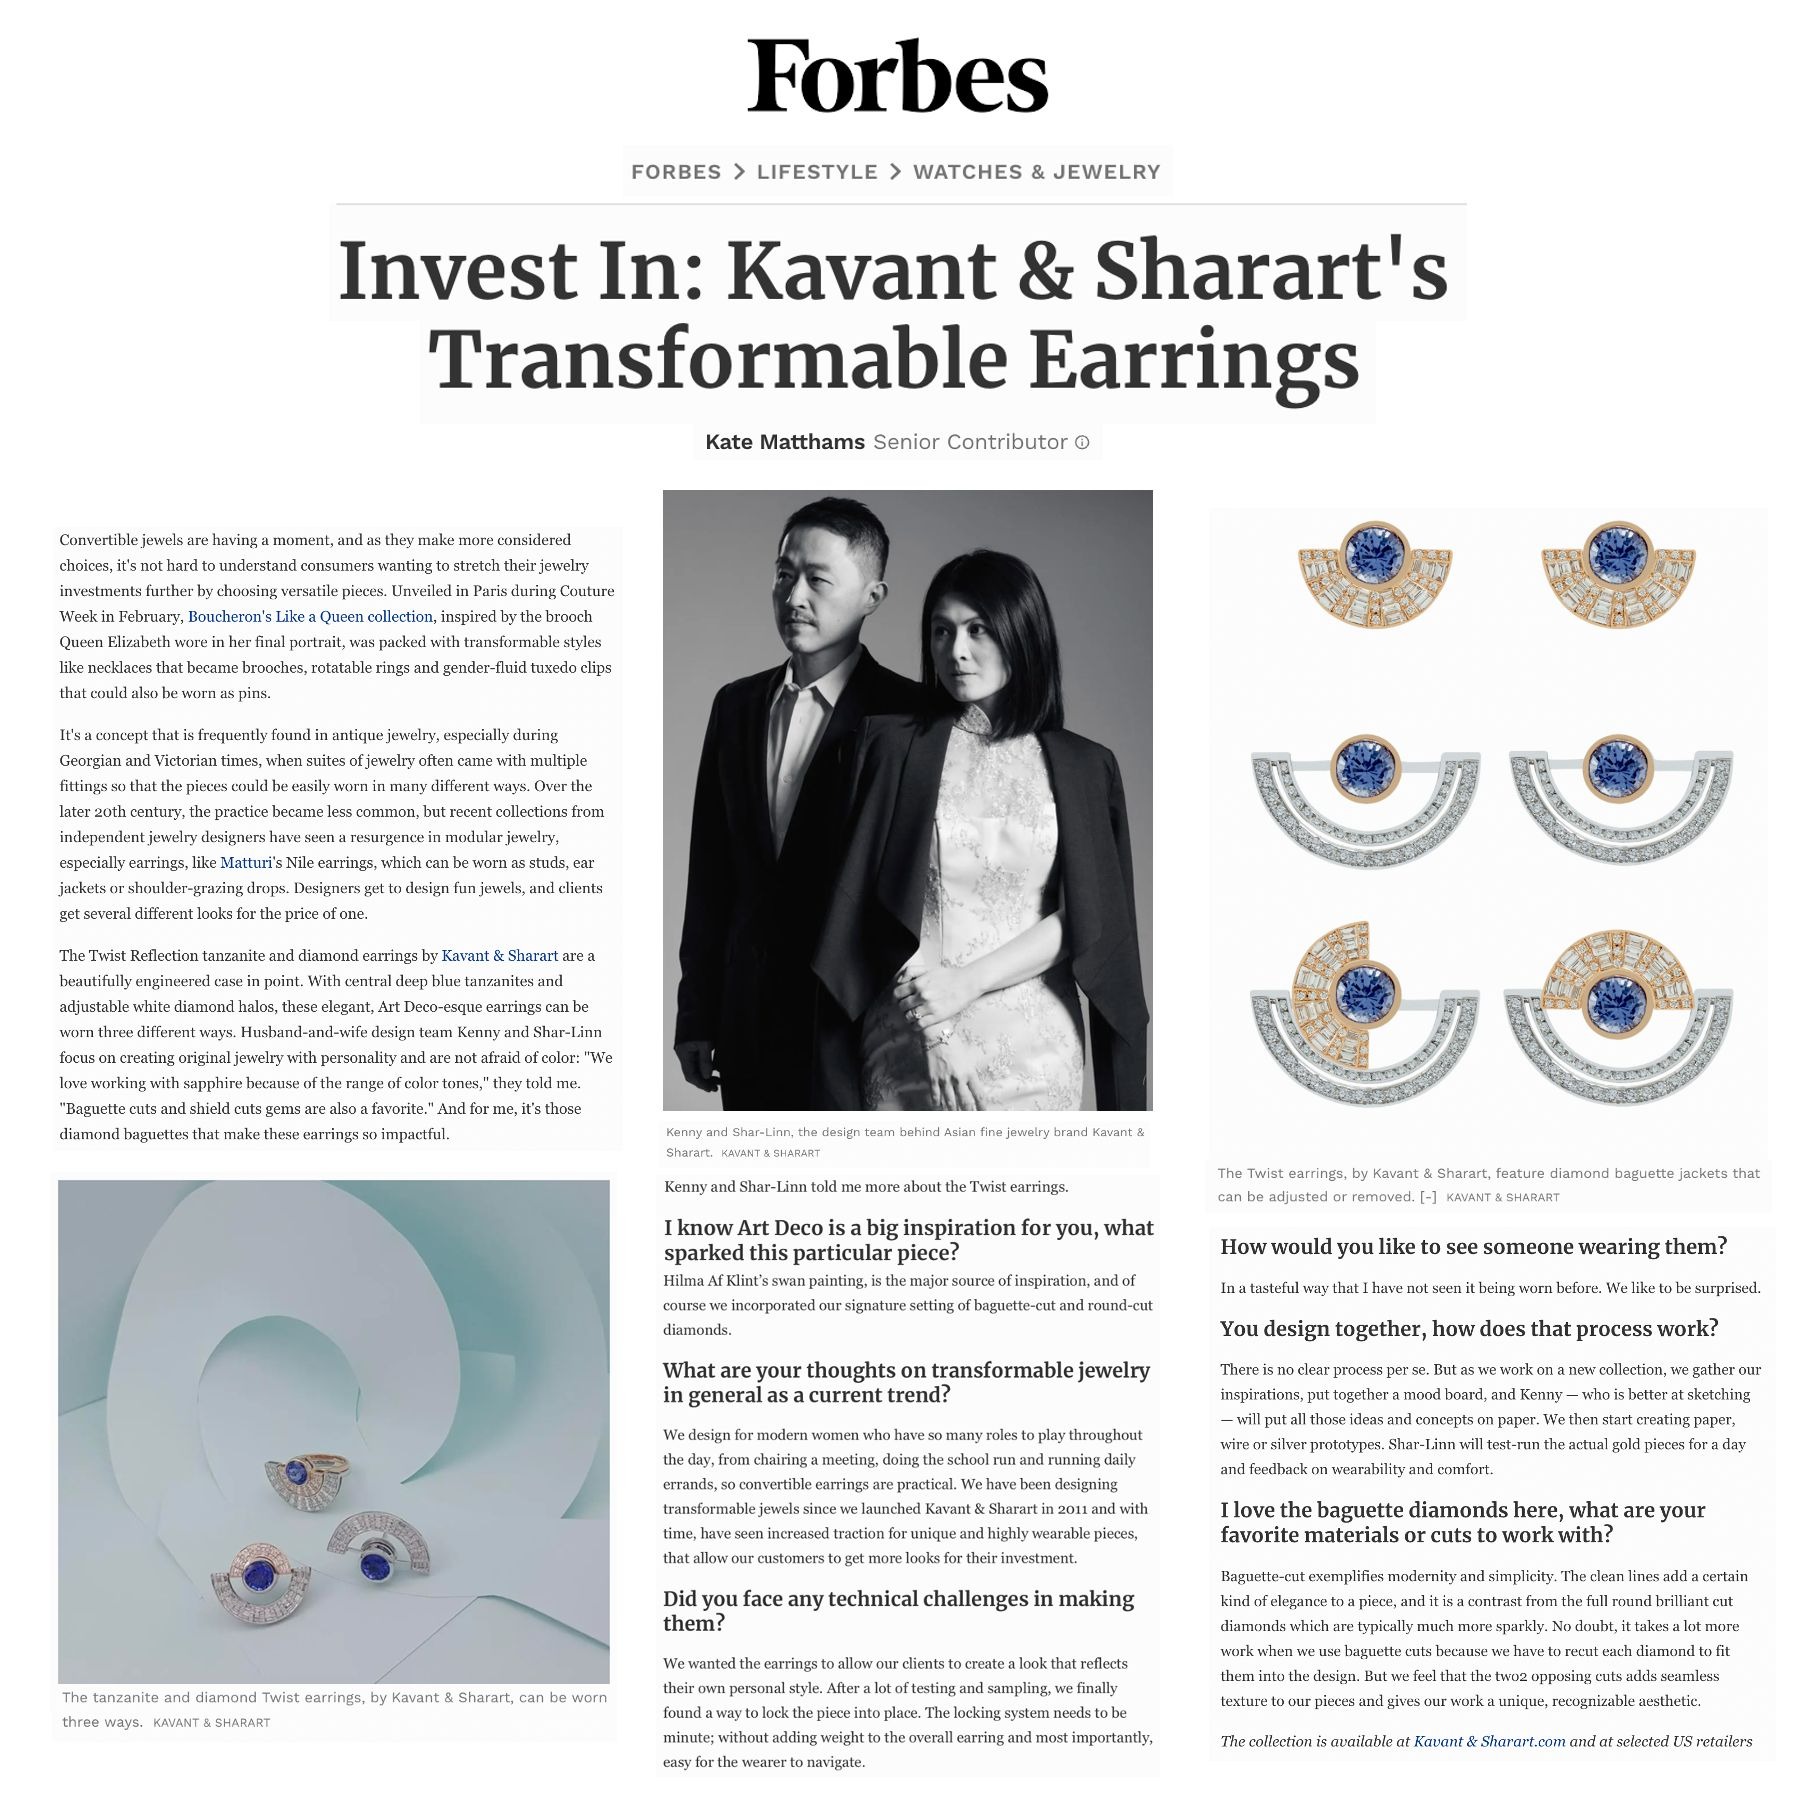 Forbes - Invest In: Kavant & Sharart's Transformable Earrings 500